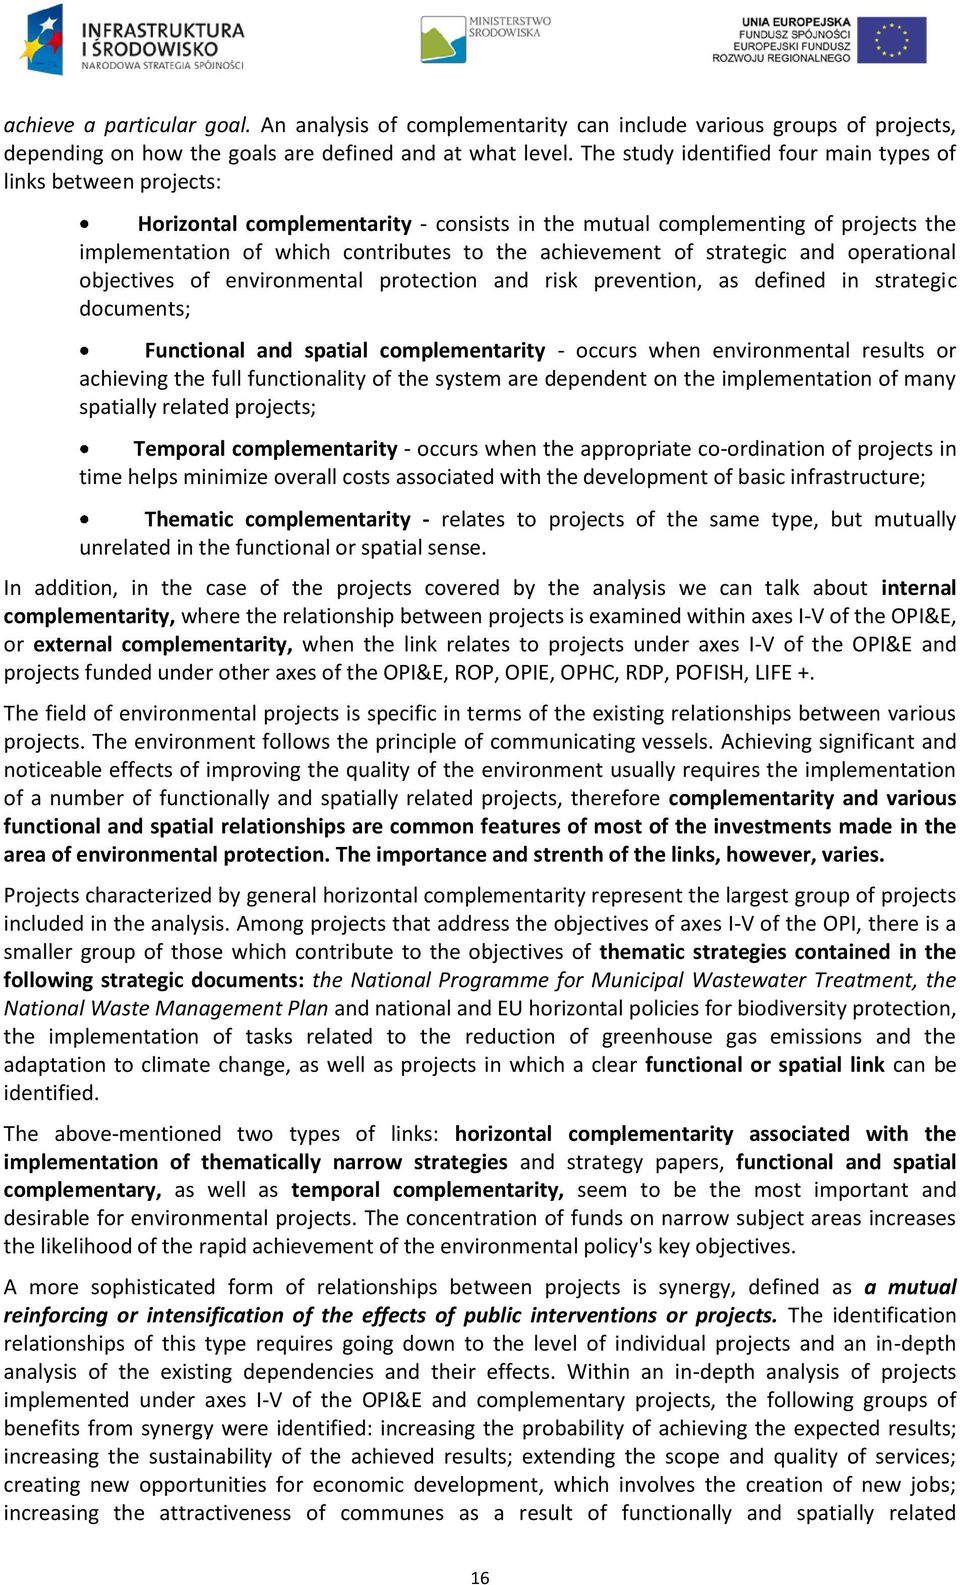 achievement of strategic and operational objectives of environmental protection and risk prevention, as defined in strategic documents; Functional and spatial complementarity - occurs when